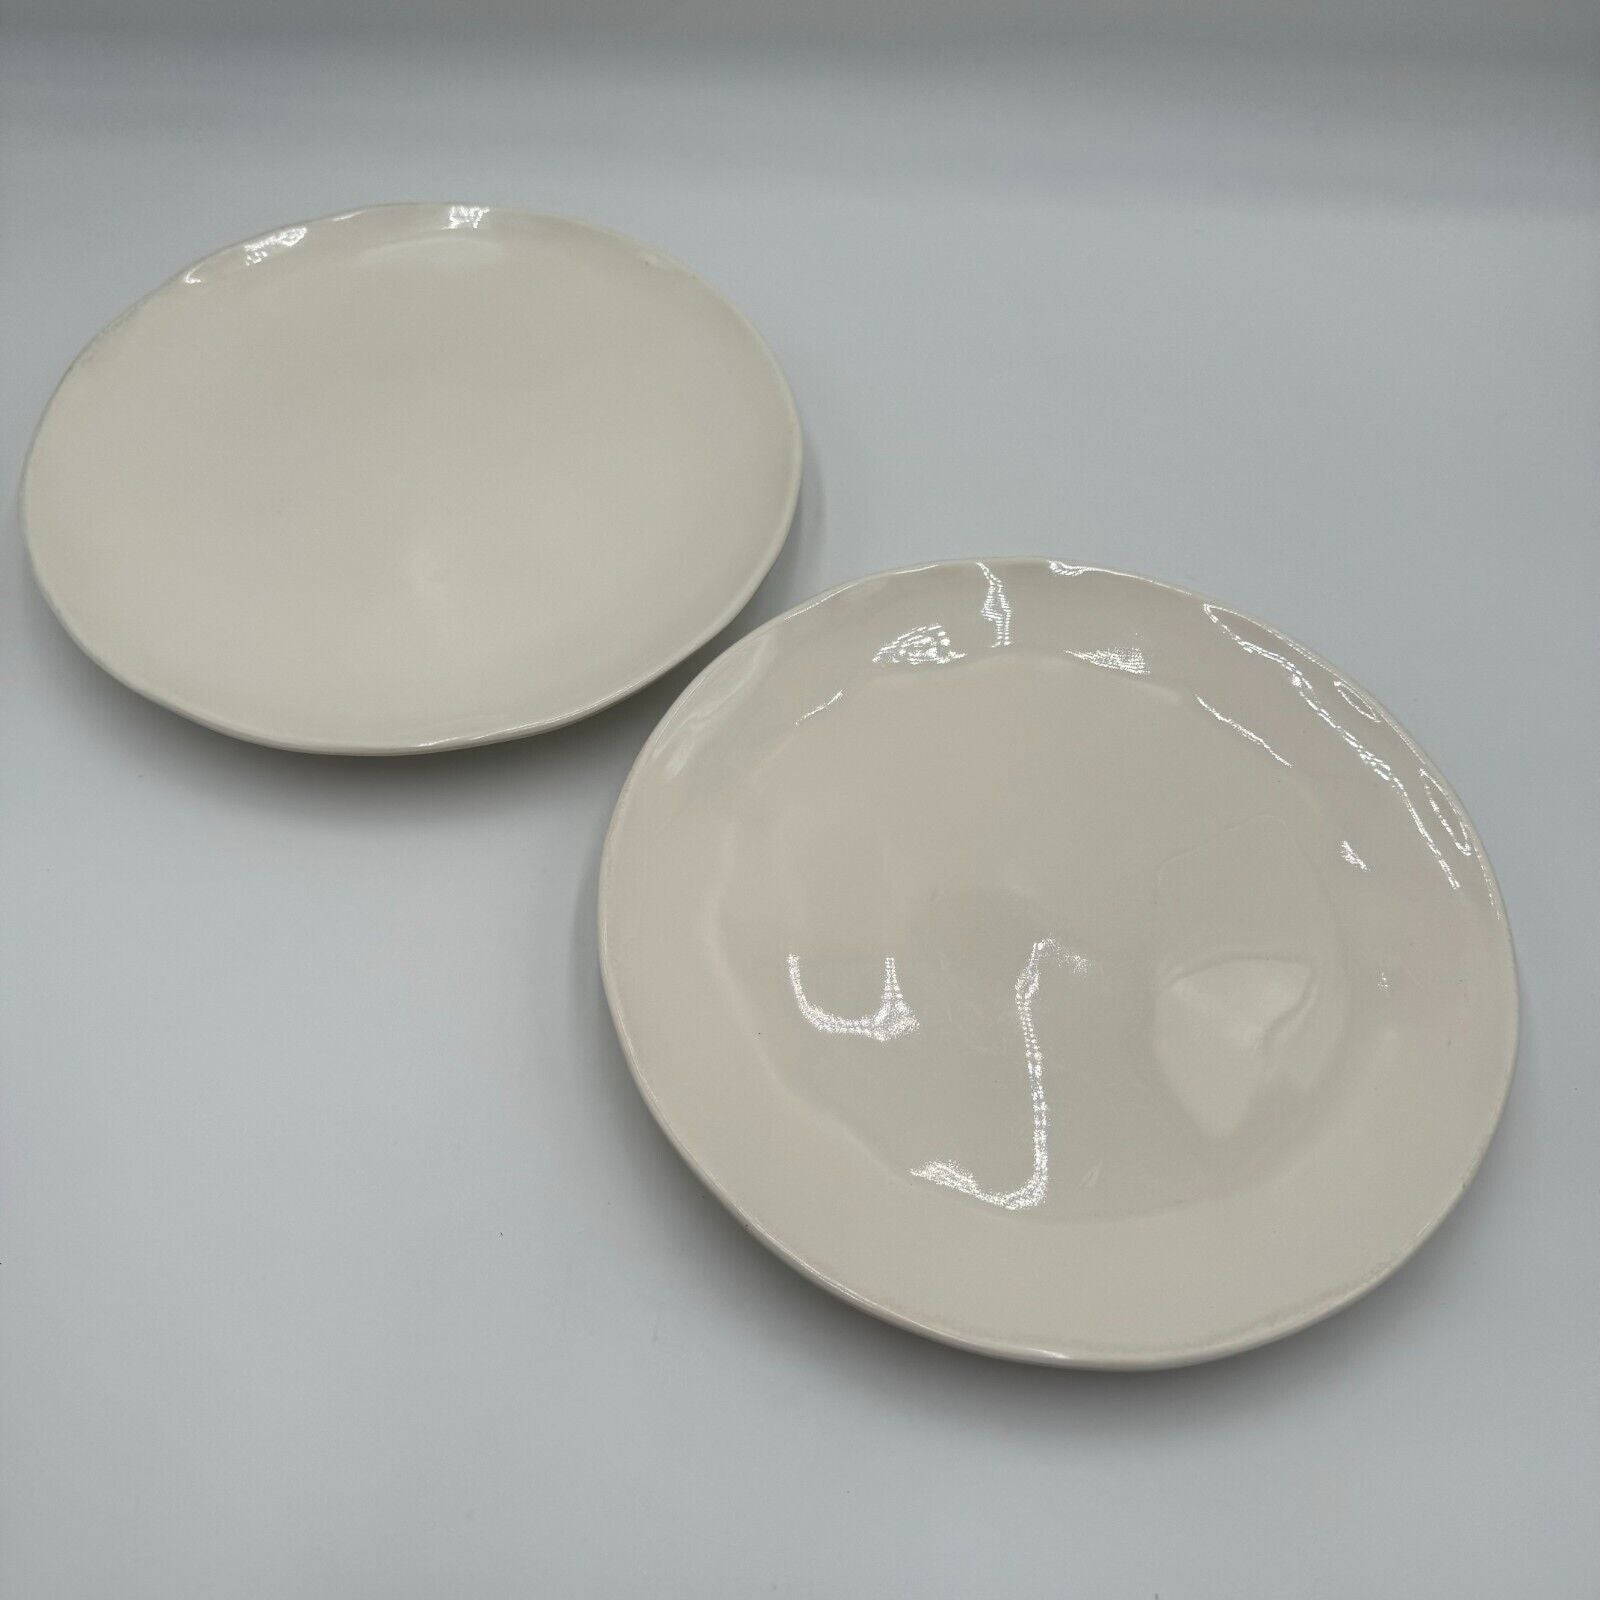 Set of 2 NSF ACME PLASTICS 12" WHITE SERVING TRAY / PLATTER WITH RUBBER FEET